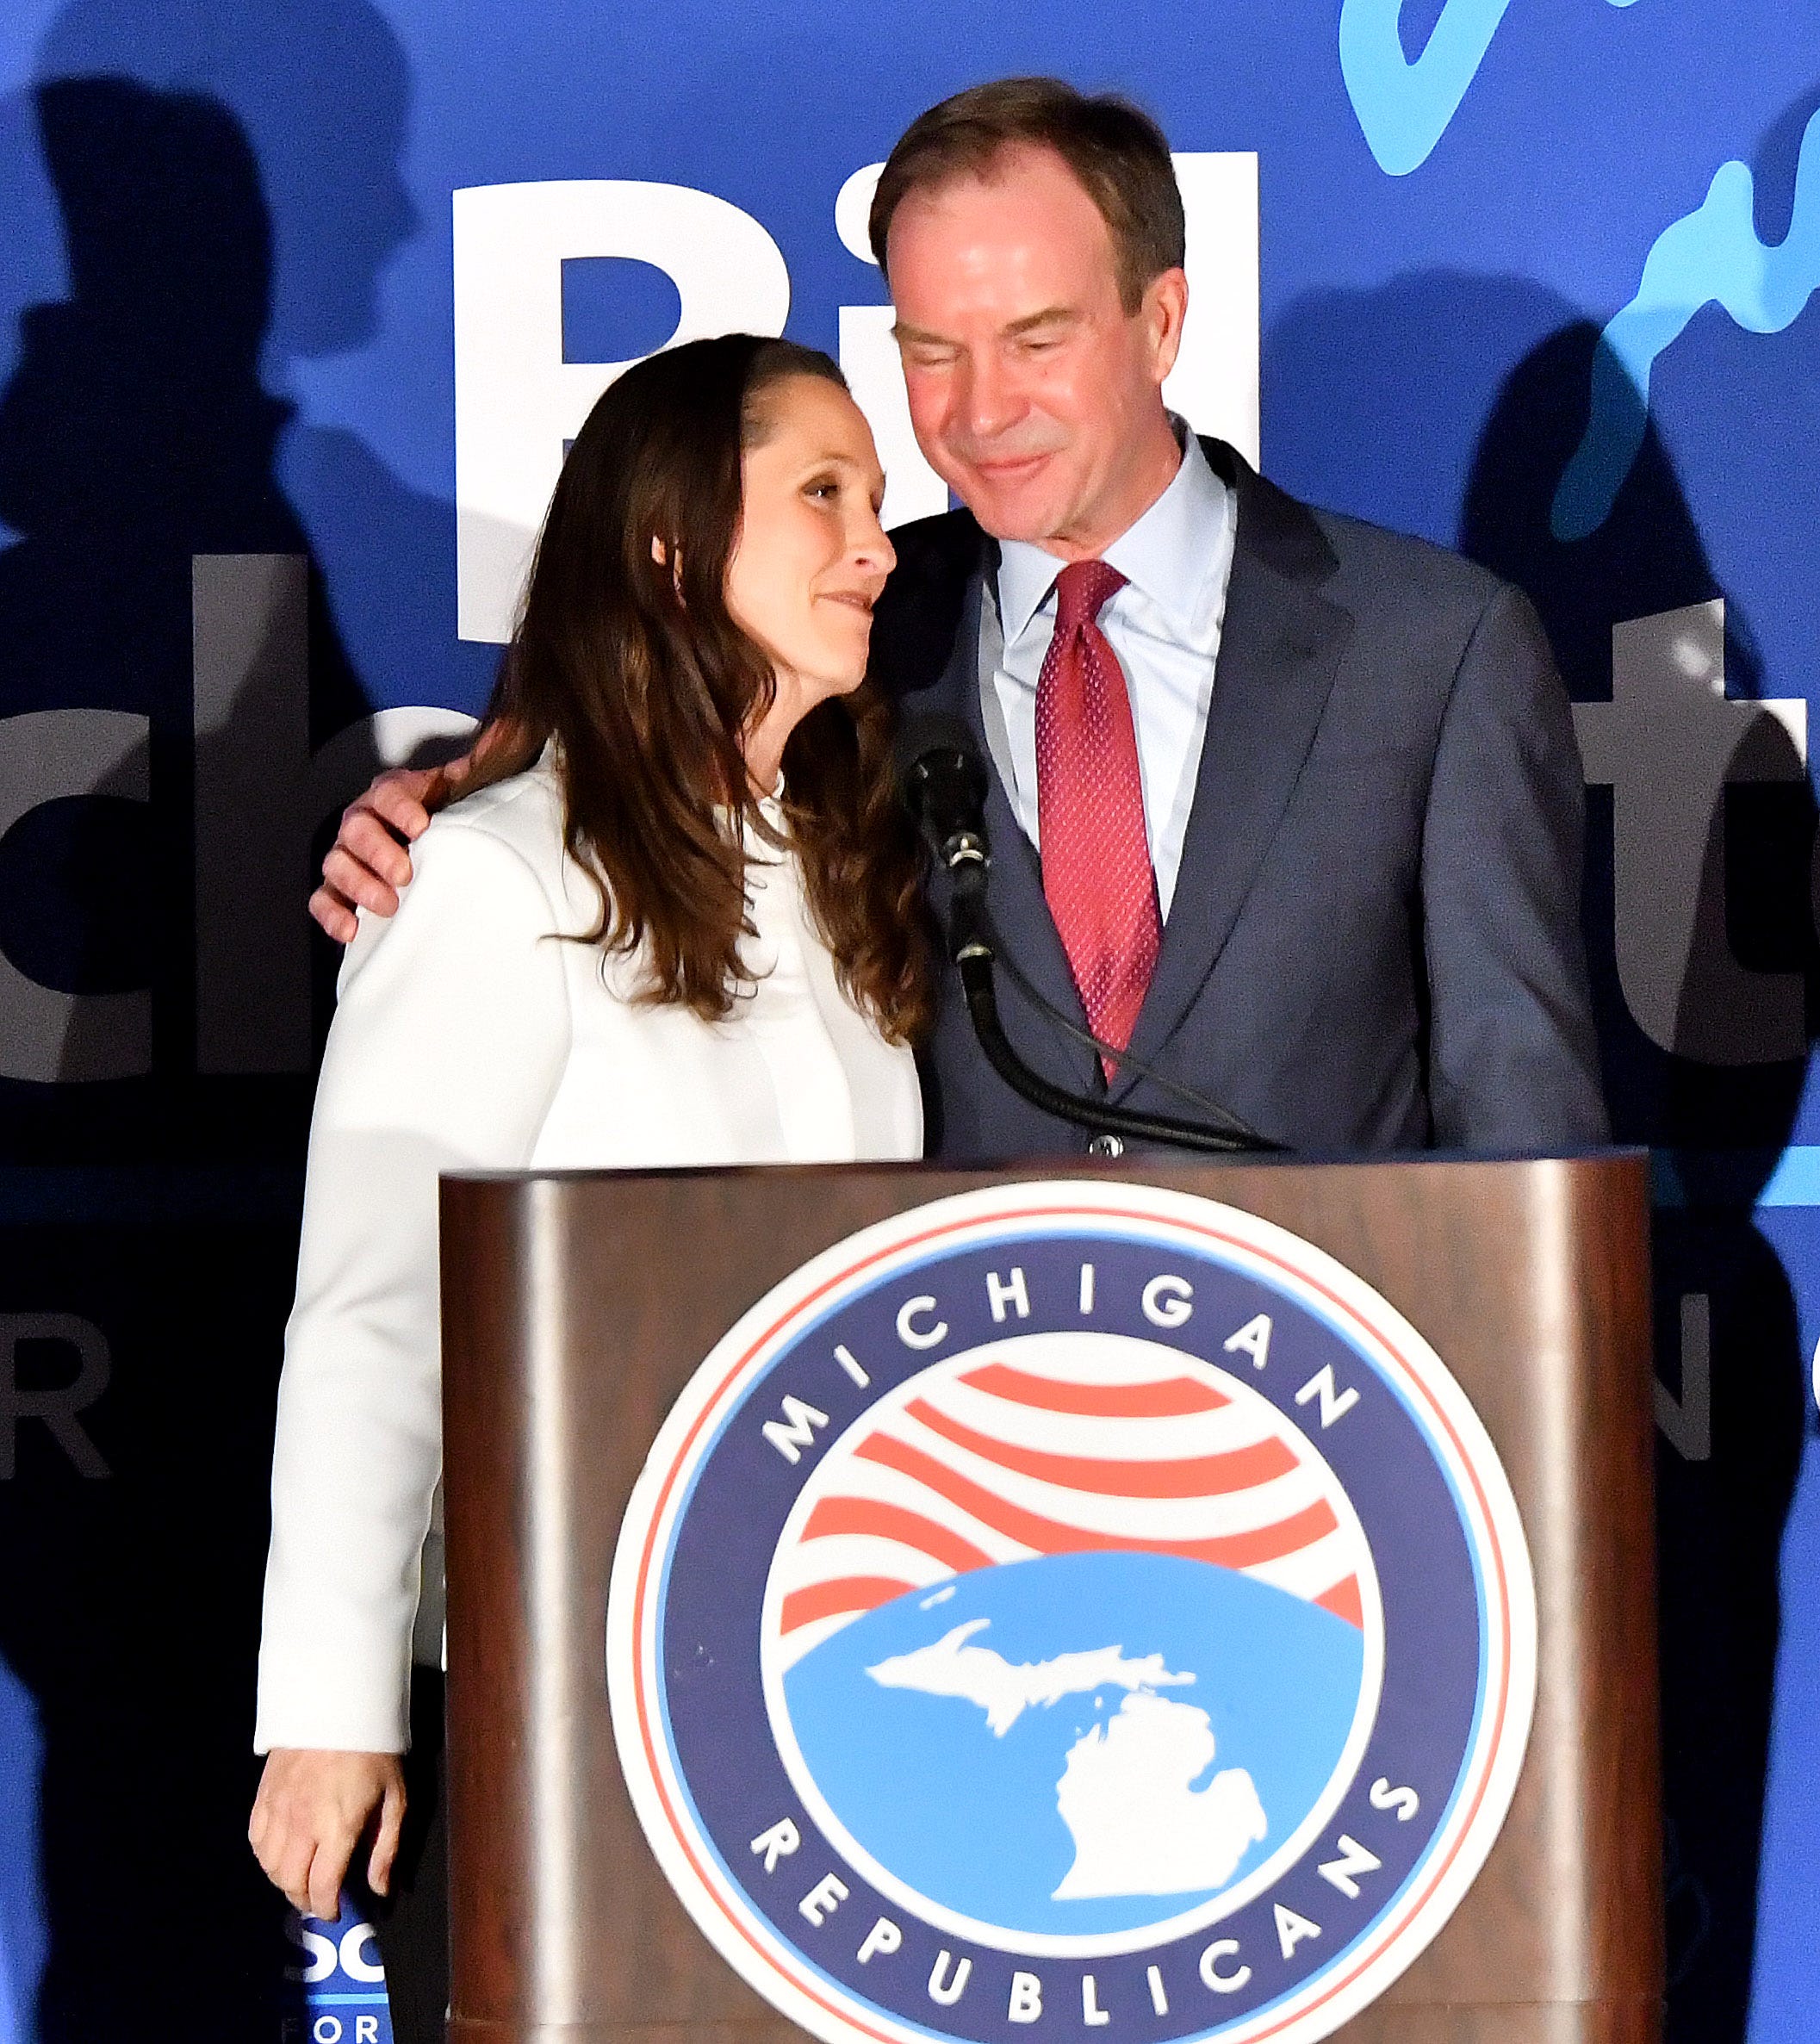 Bill Schuette and Lisa Posthumus Lyons concede the governor's race as the Michigan GOP gathers at the Lansing Center on Election Night.